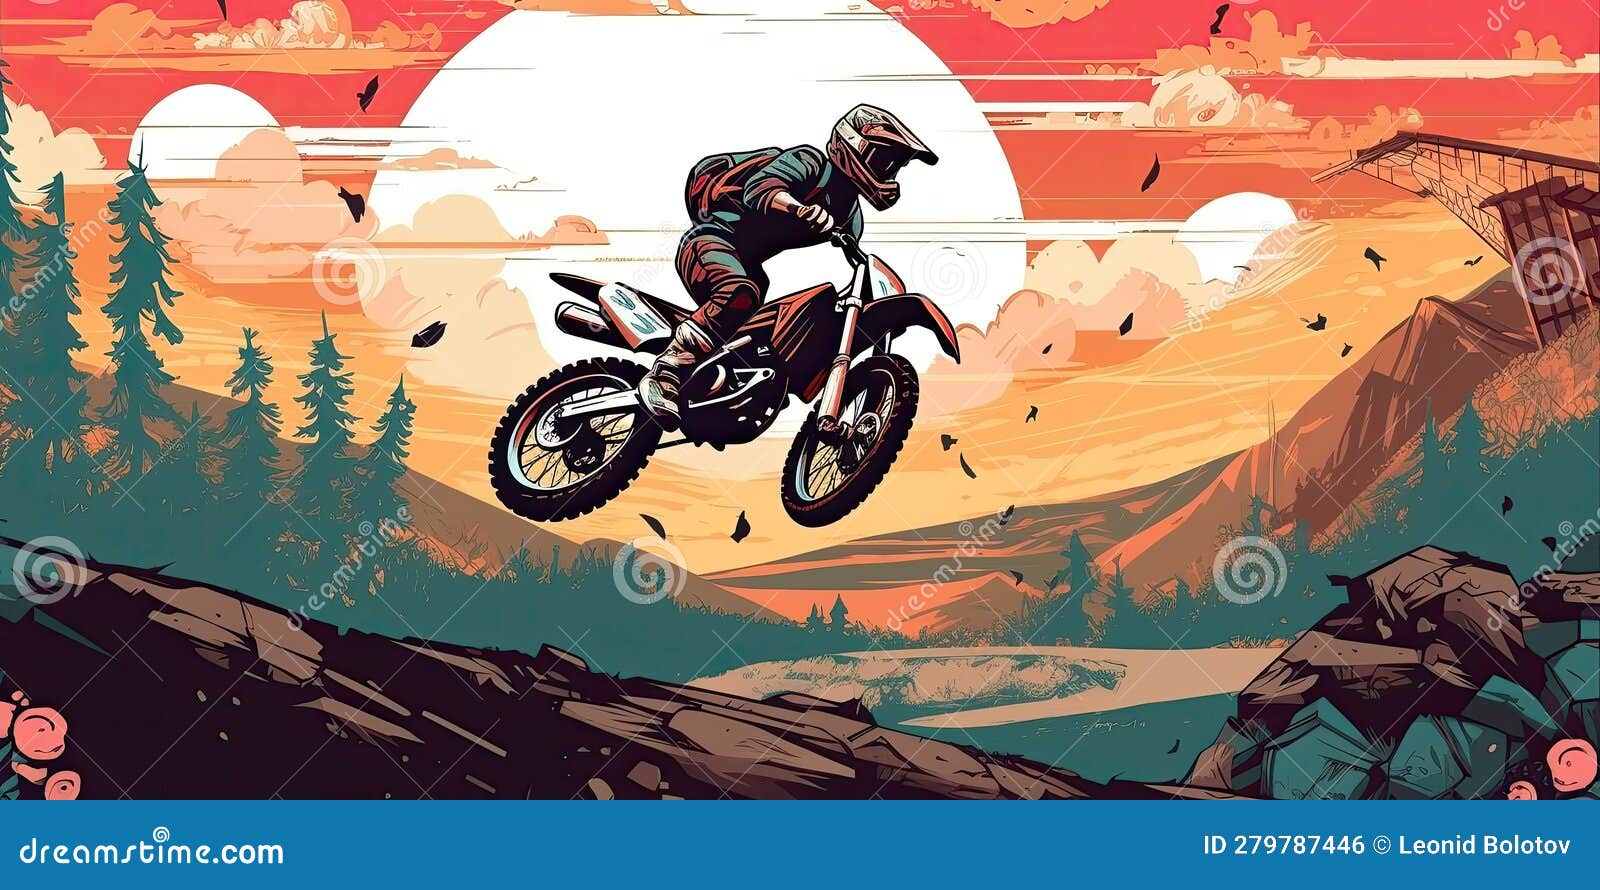 racer on a motorcycle does a stunt jump. supercross, motocross, high speed. sports concept. digital art. comic book style ai